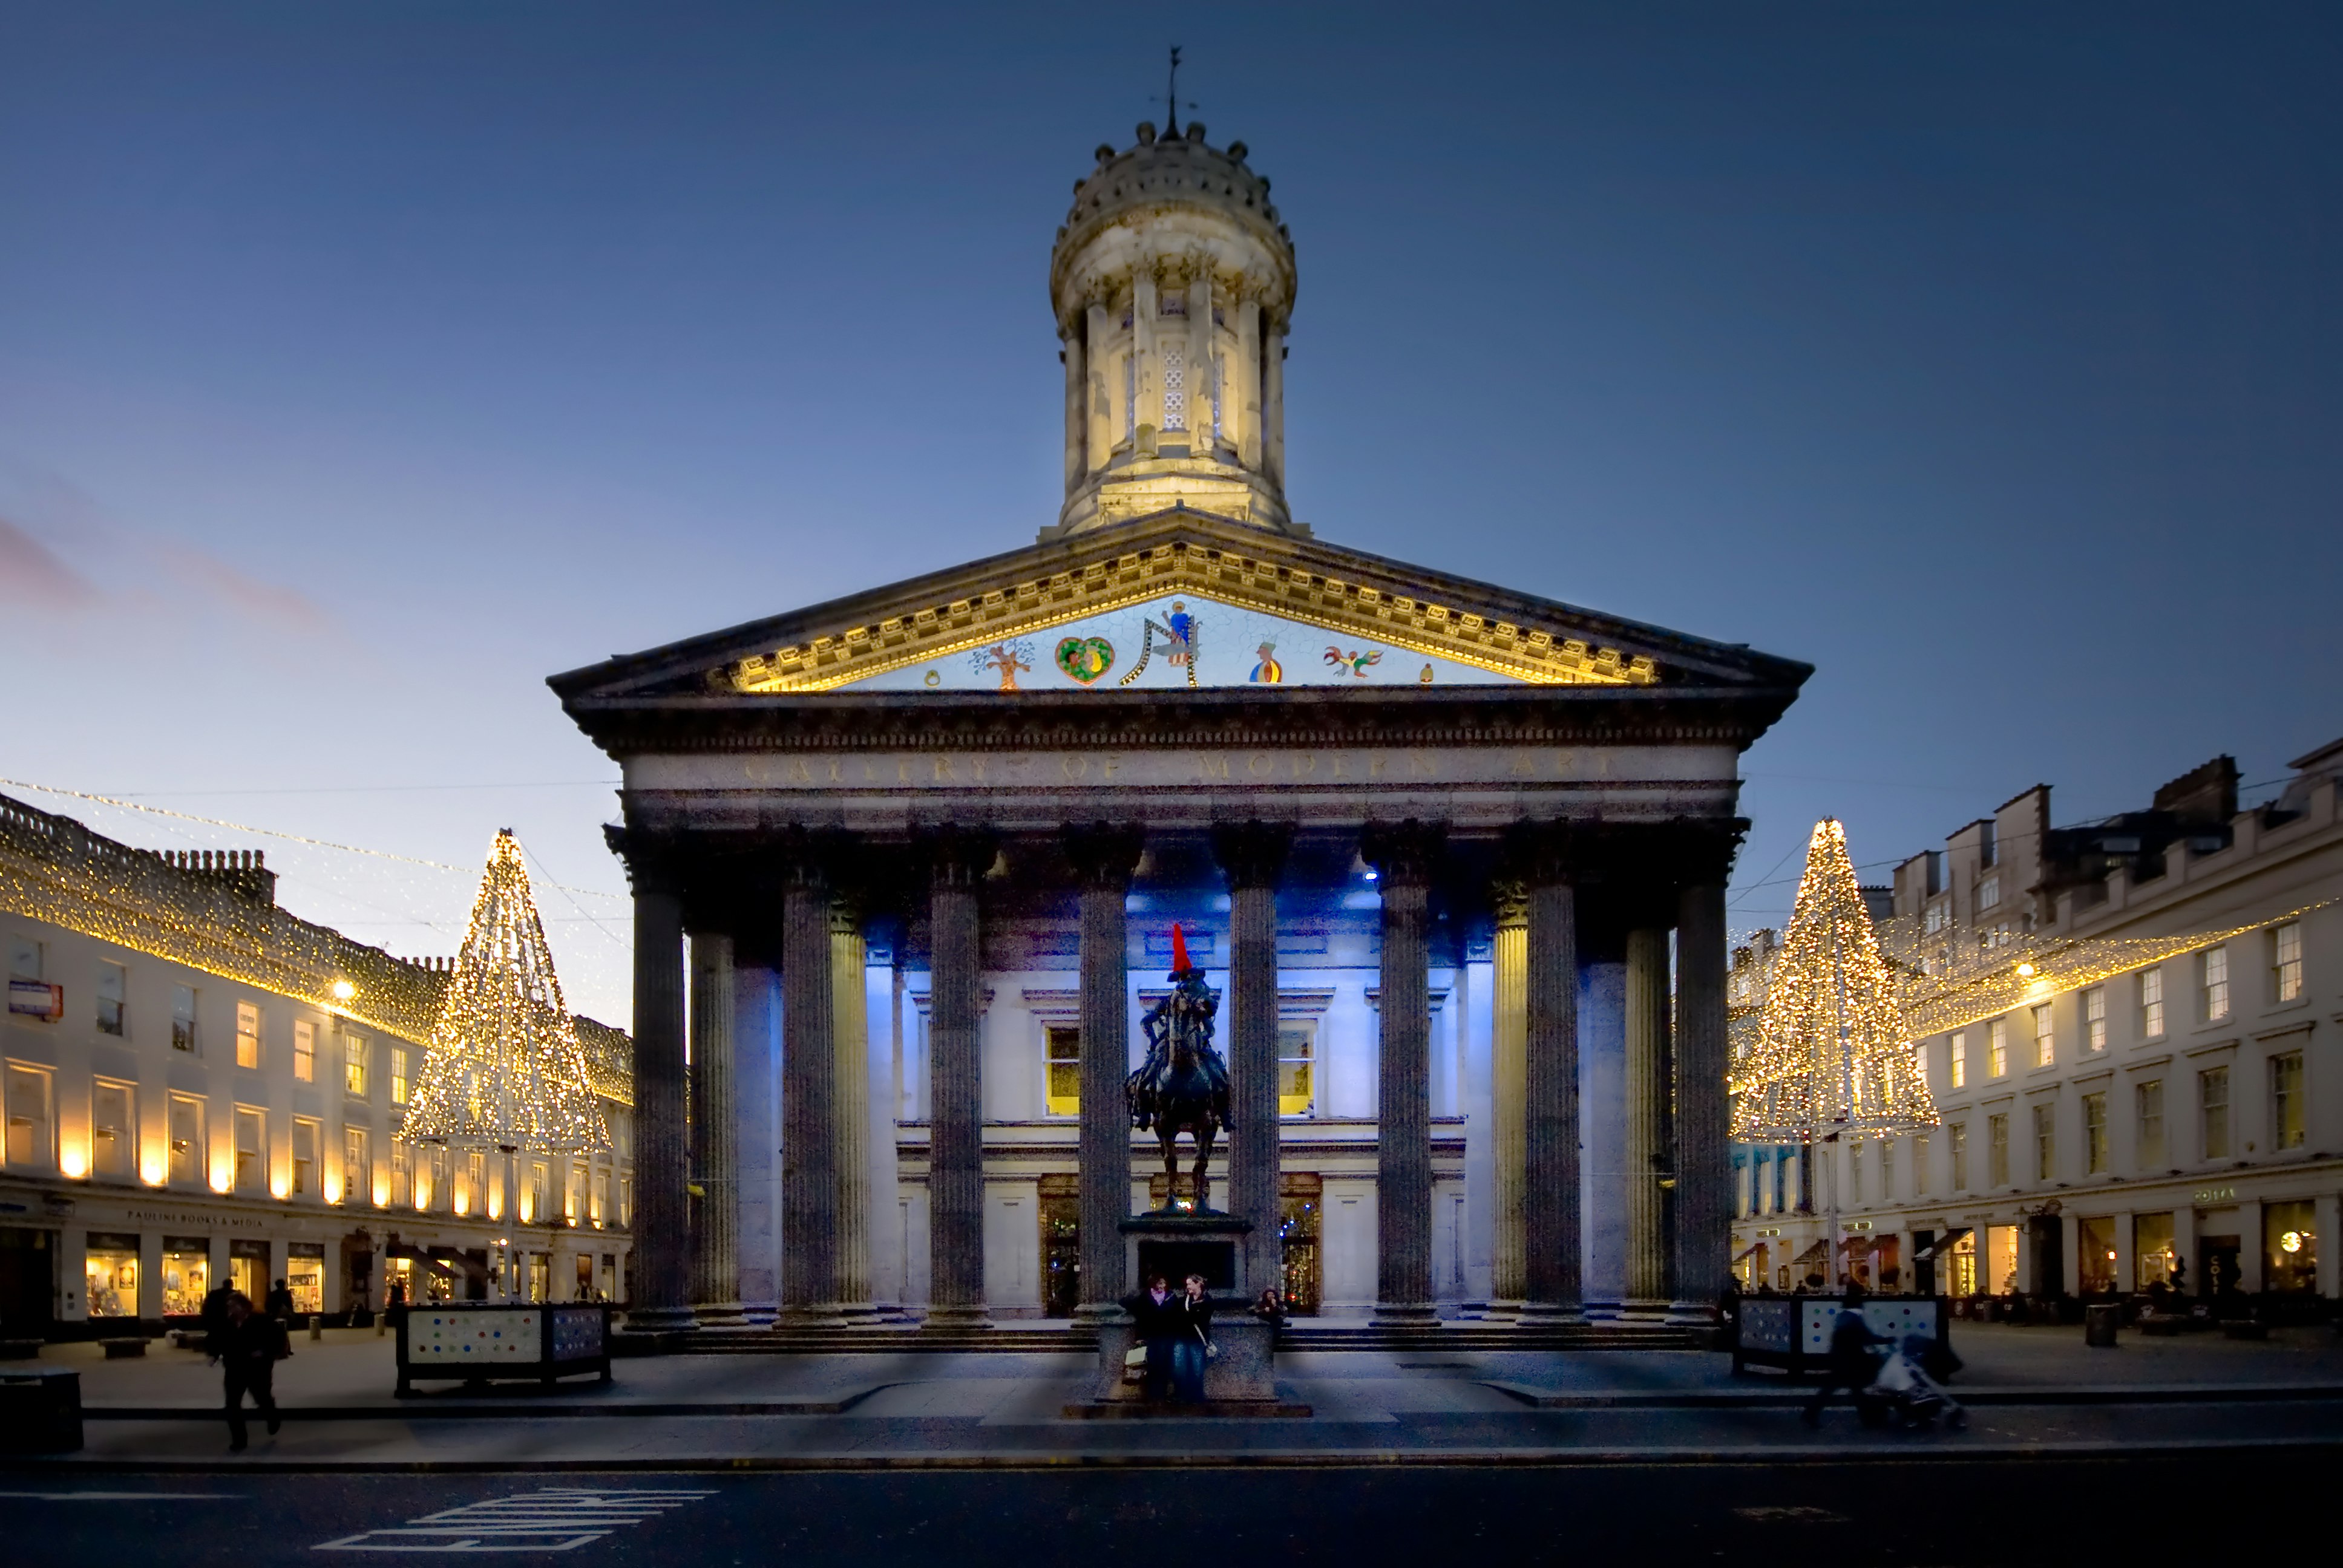 Glasgow's Gallery of Modern Art, a neoclassical building with columns and a statue of a horseman in front.